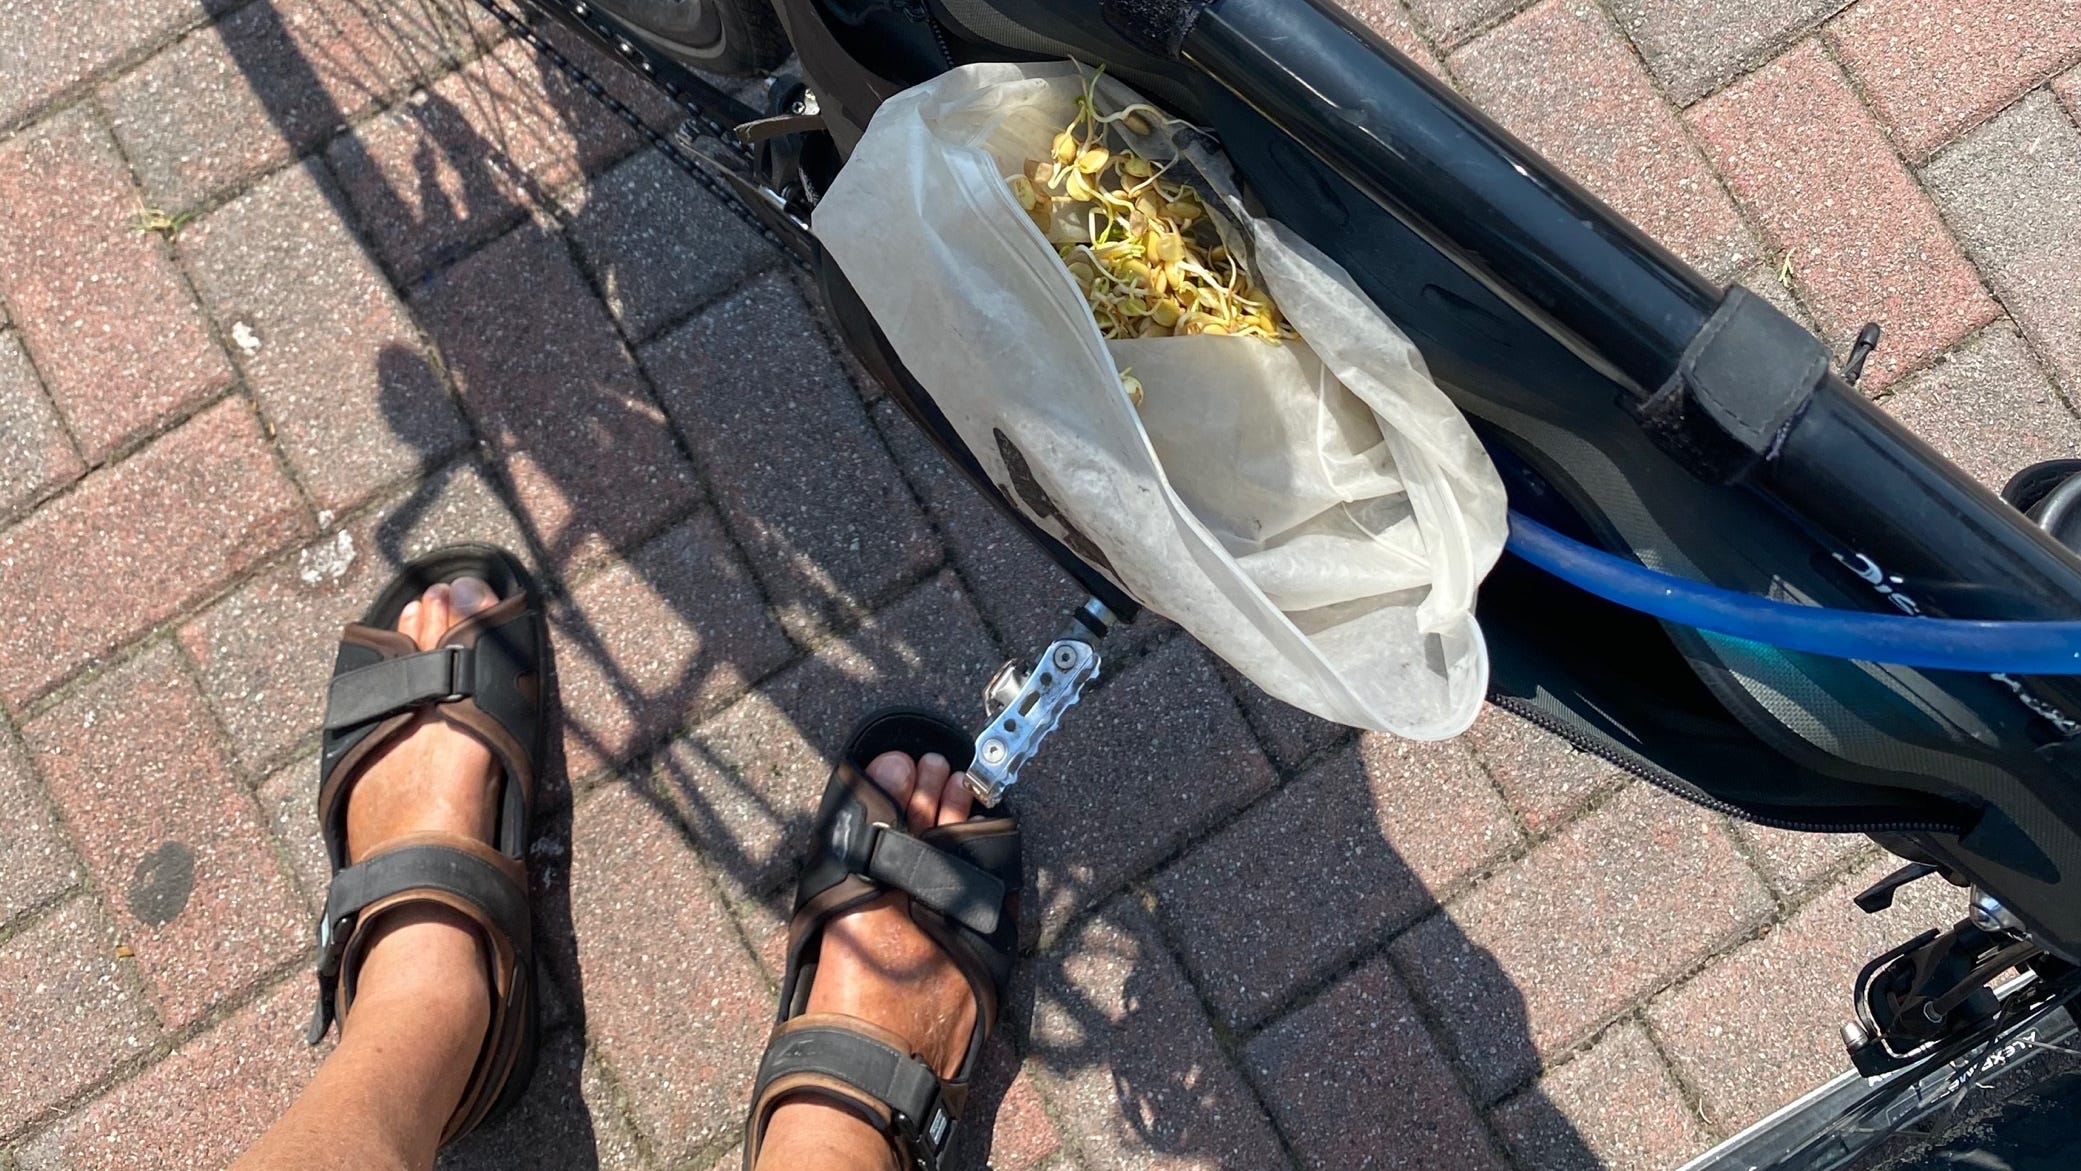 Some of the lentil sprouts Paul Webb grew in his phone pouch for his ride across the United States on a bicycle.